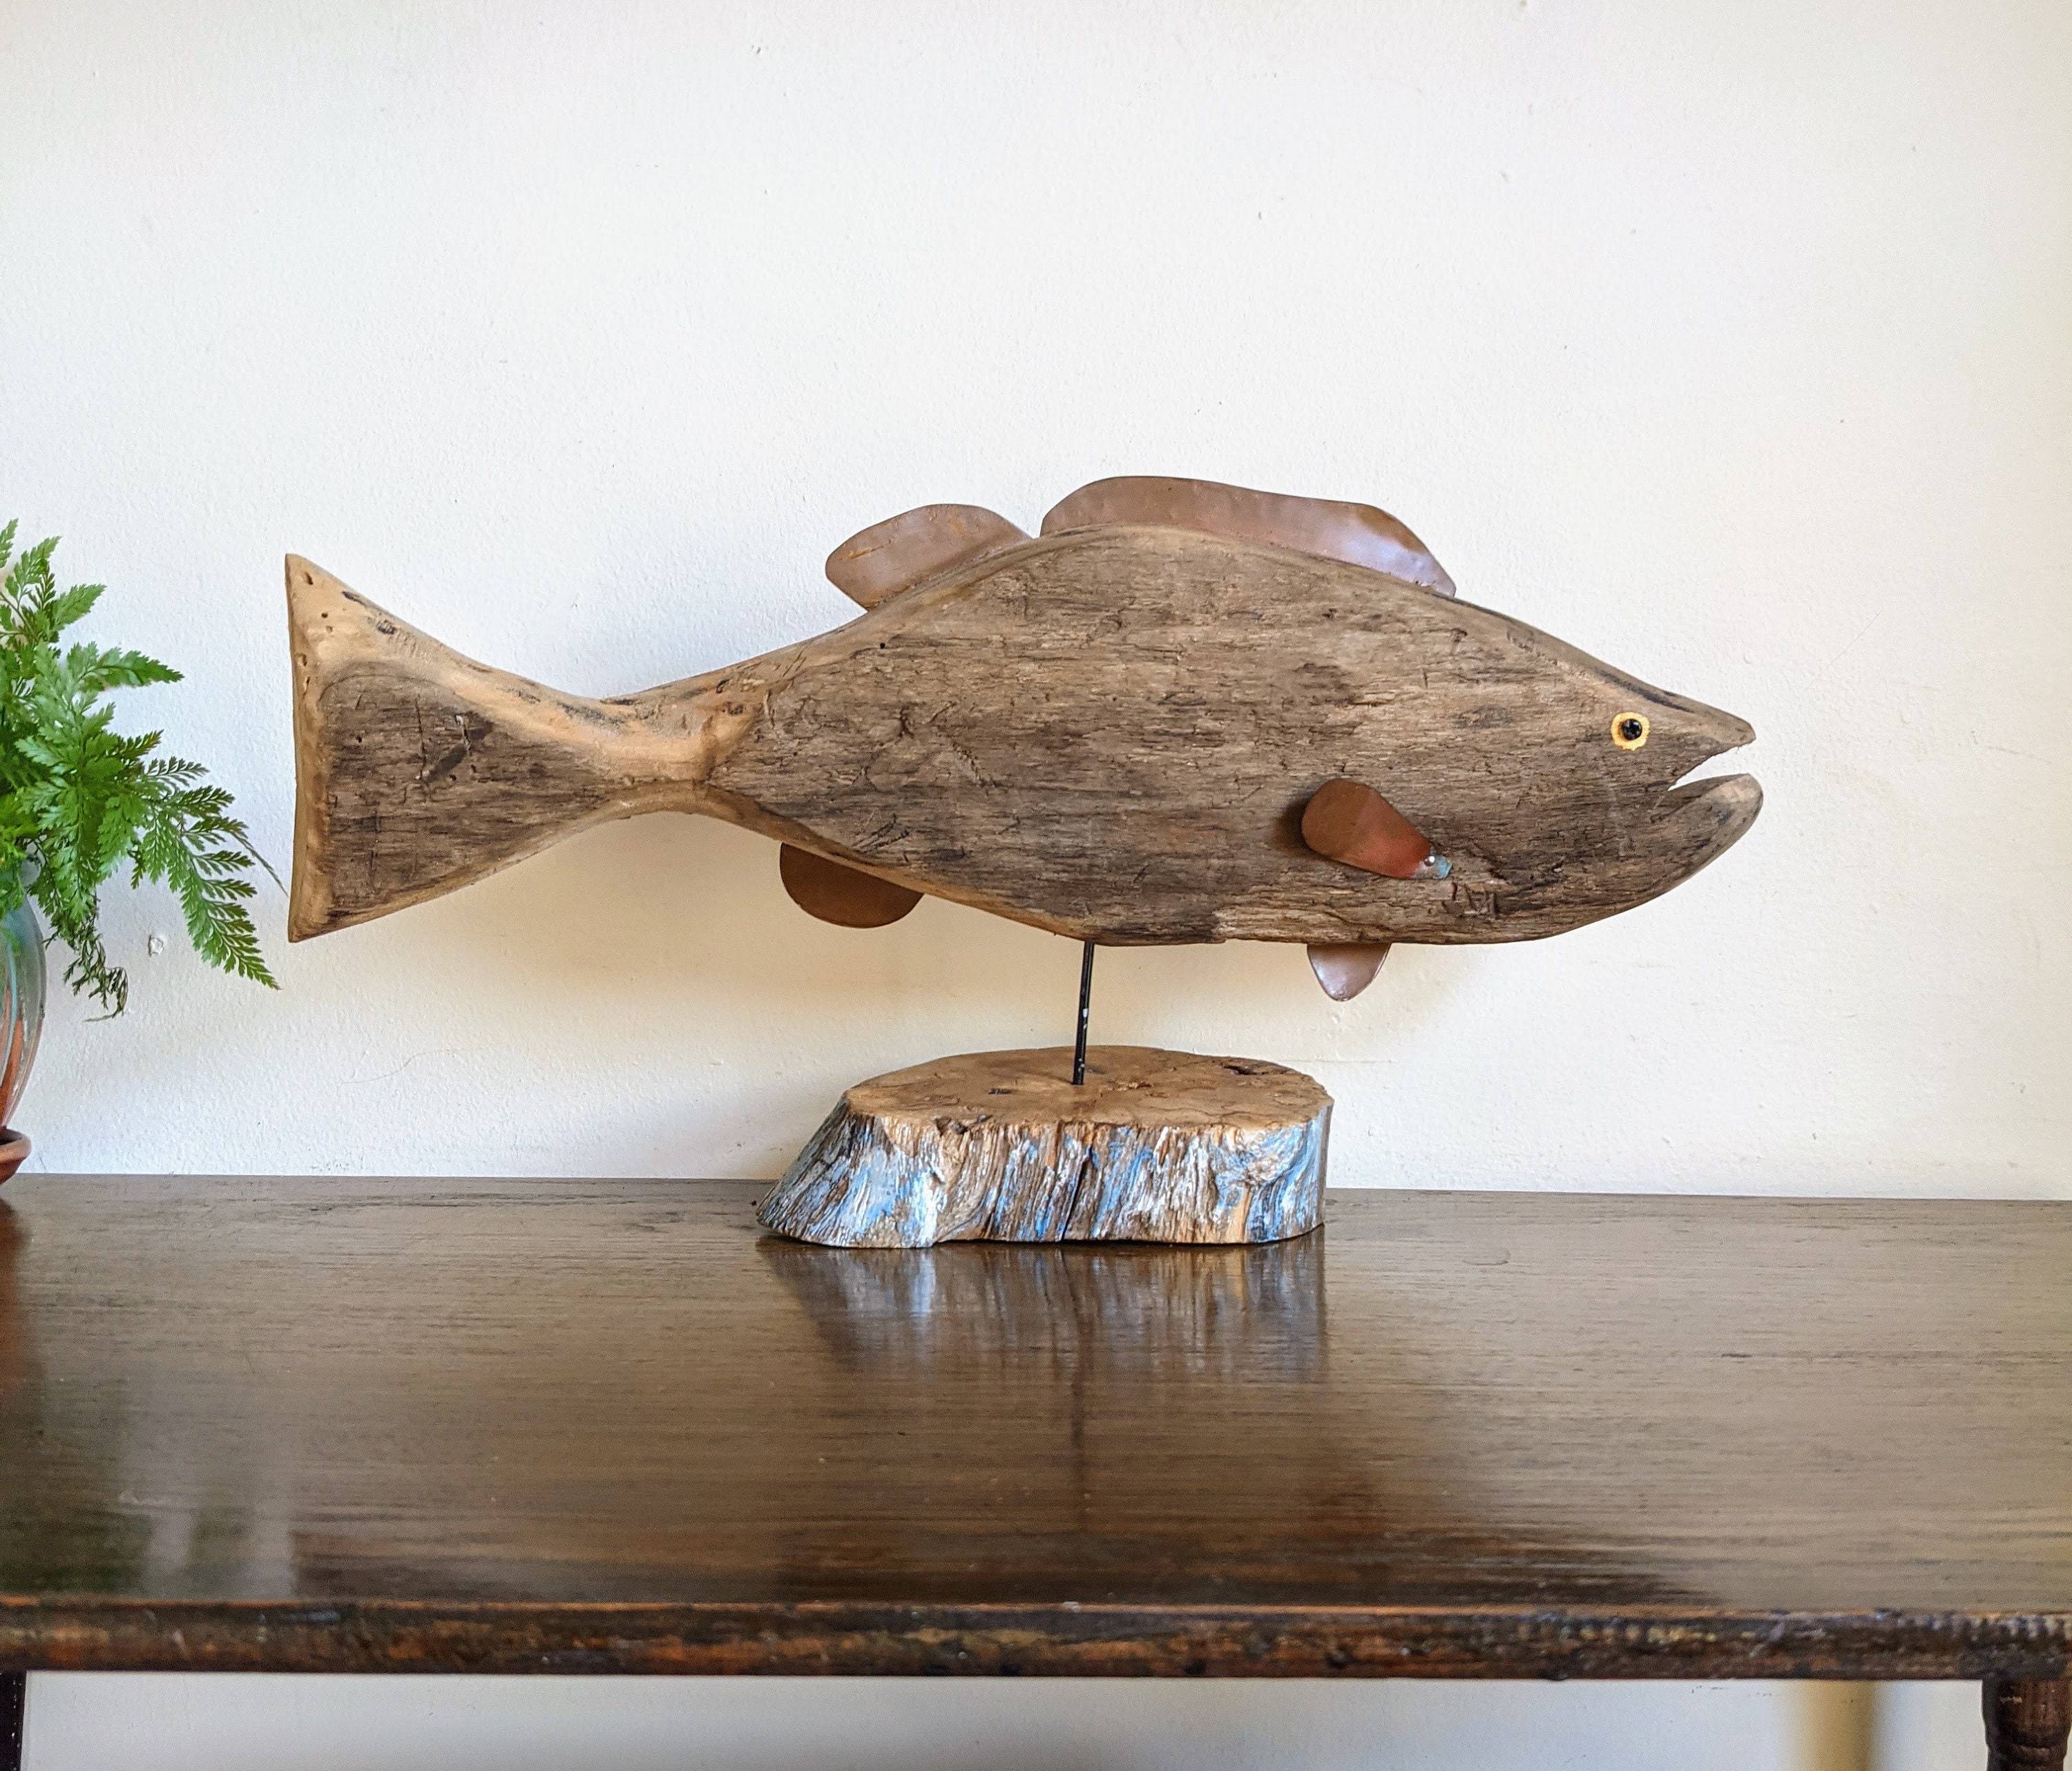 Primitive Carved Wood Fish Copper Fins Large Bass on Stand Signed